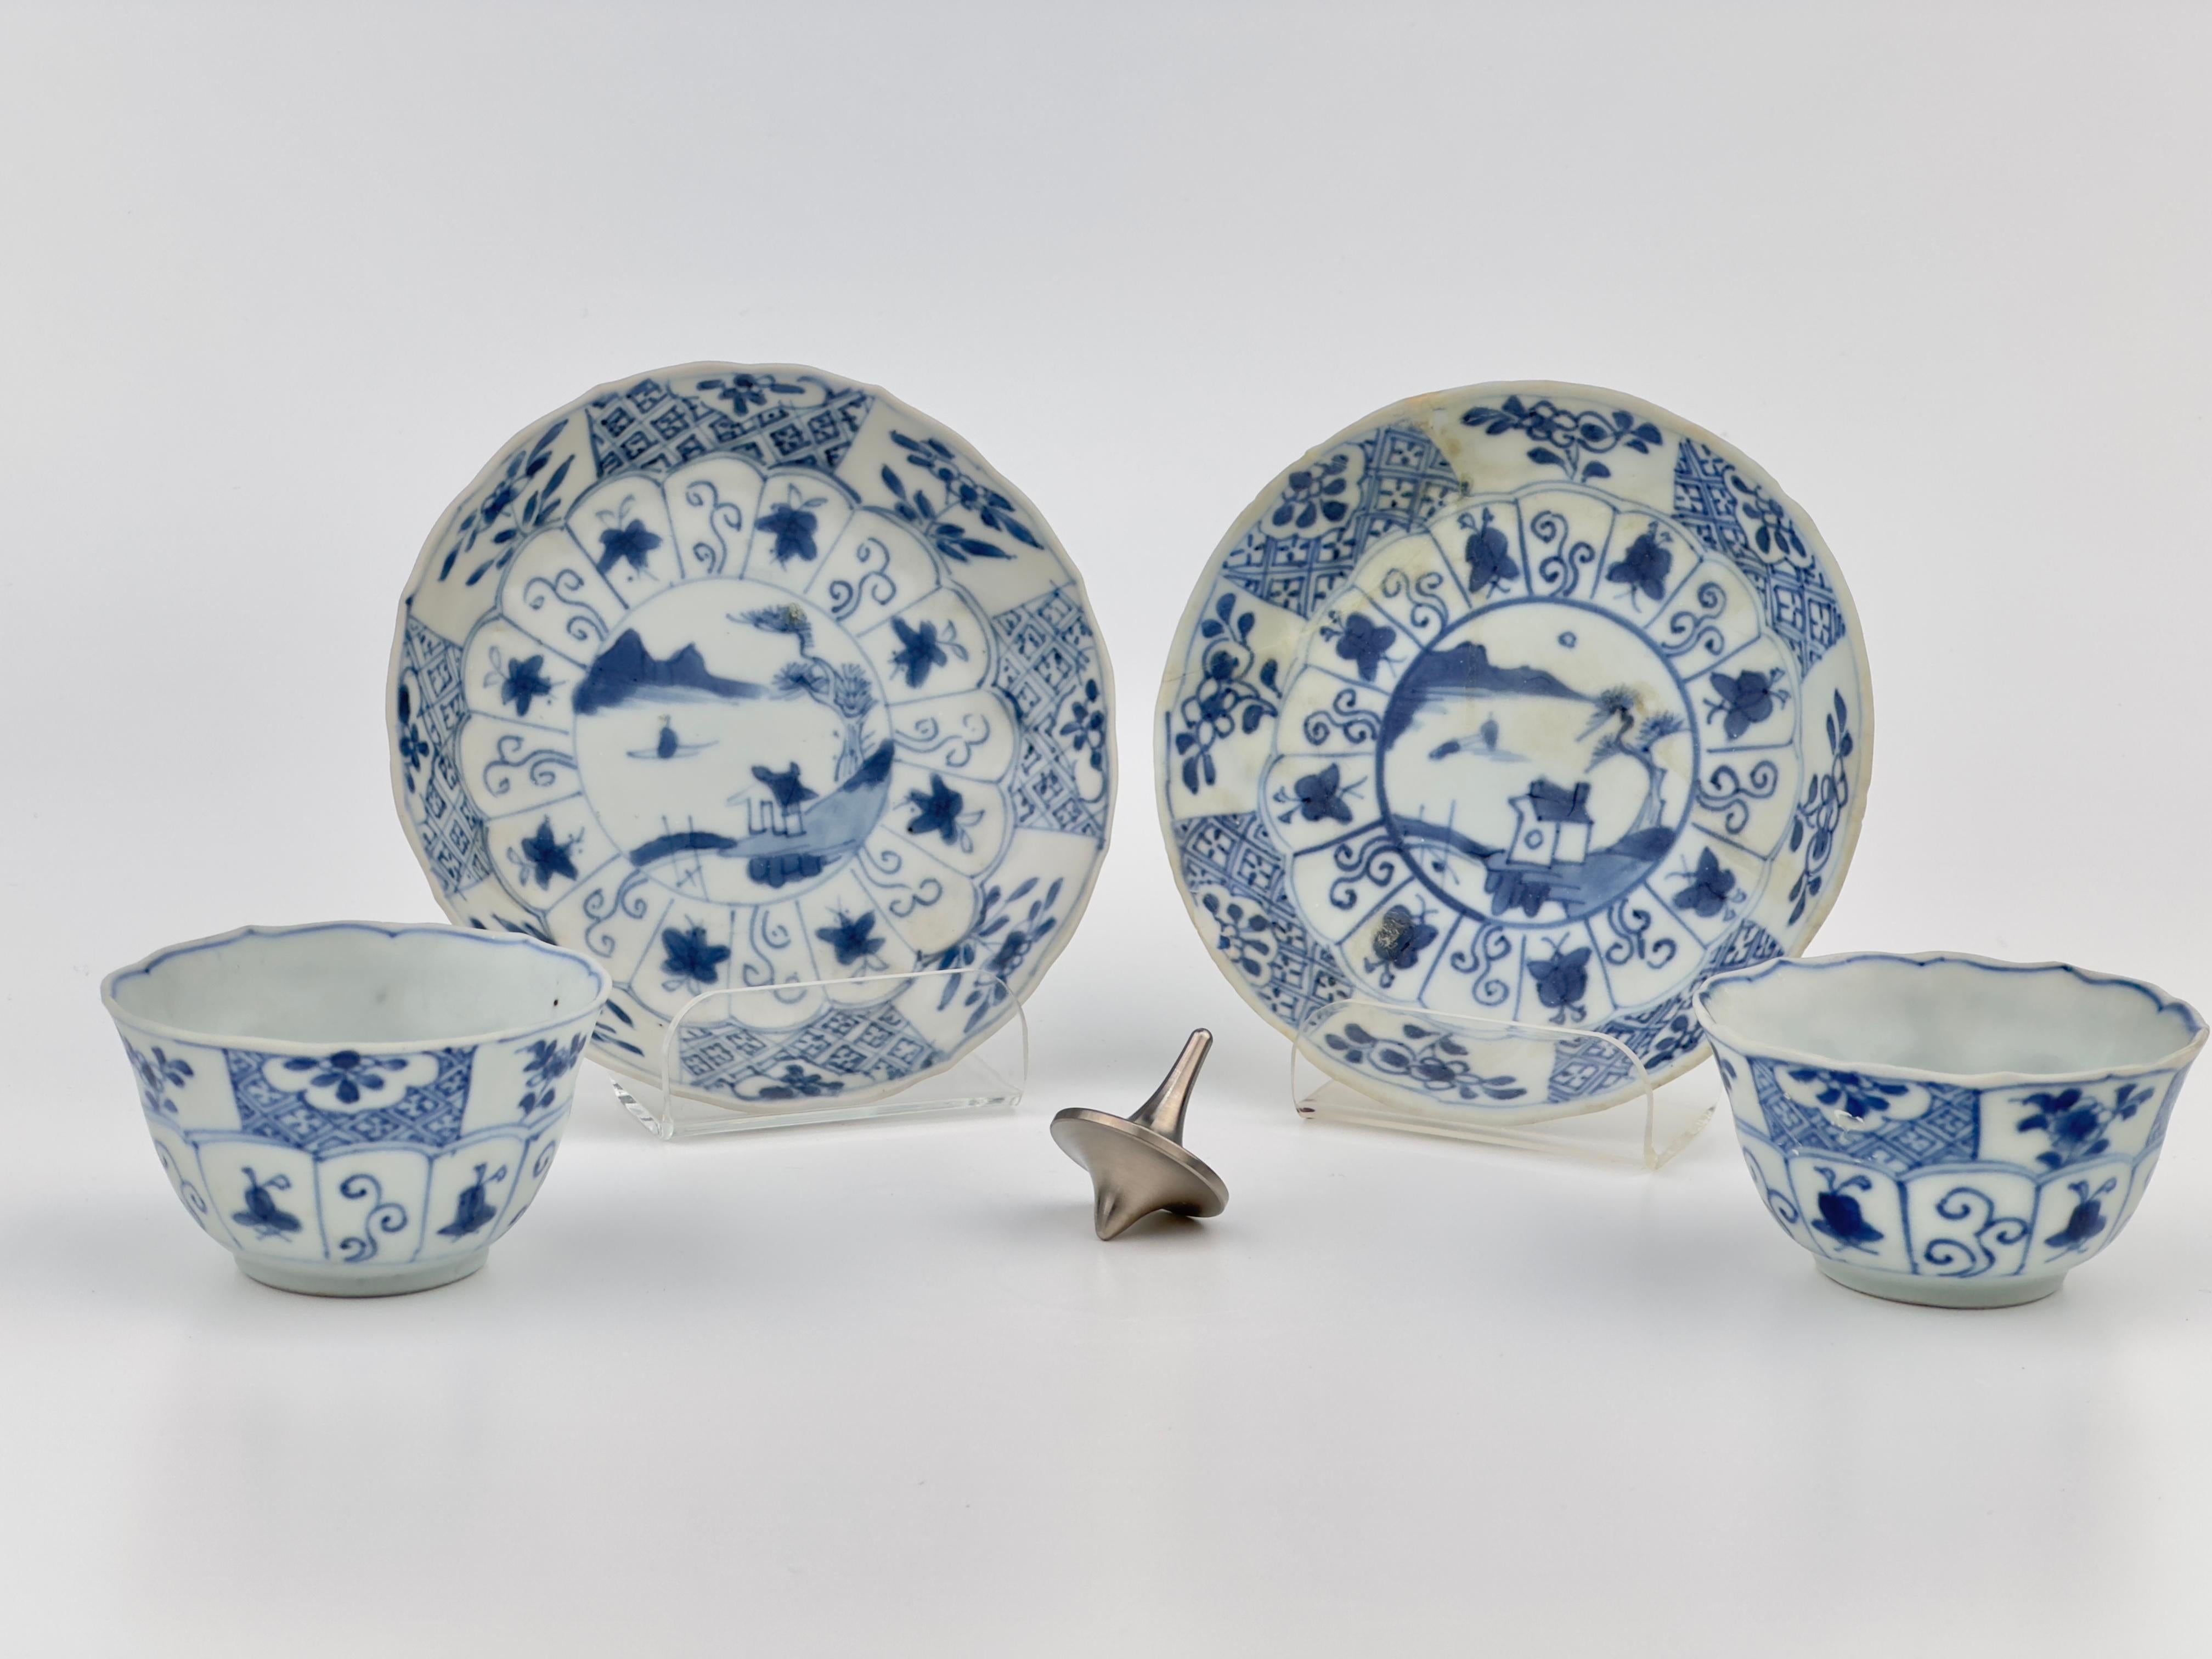 Glazed Blue and white tea set c 1725, Qing dynasty, Yongzheng reign For Sale